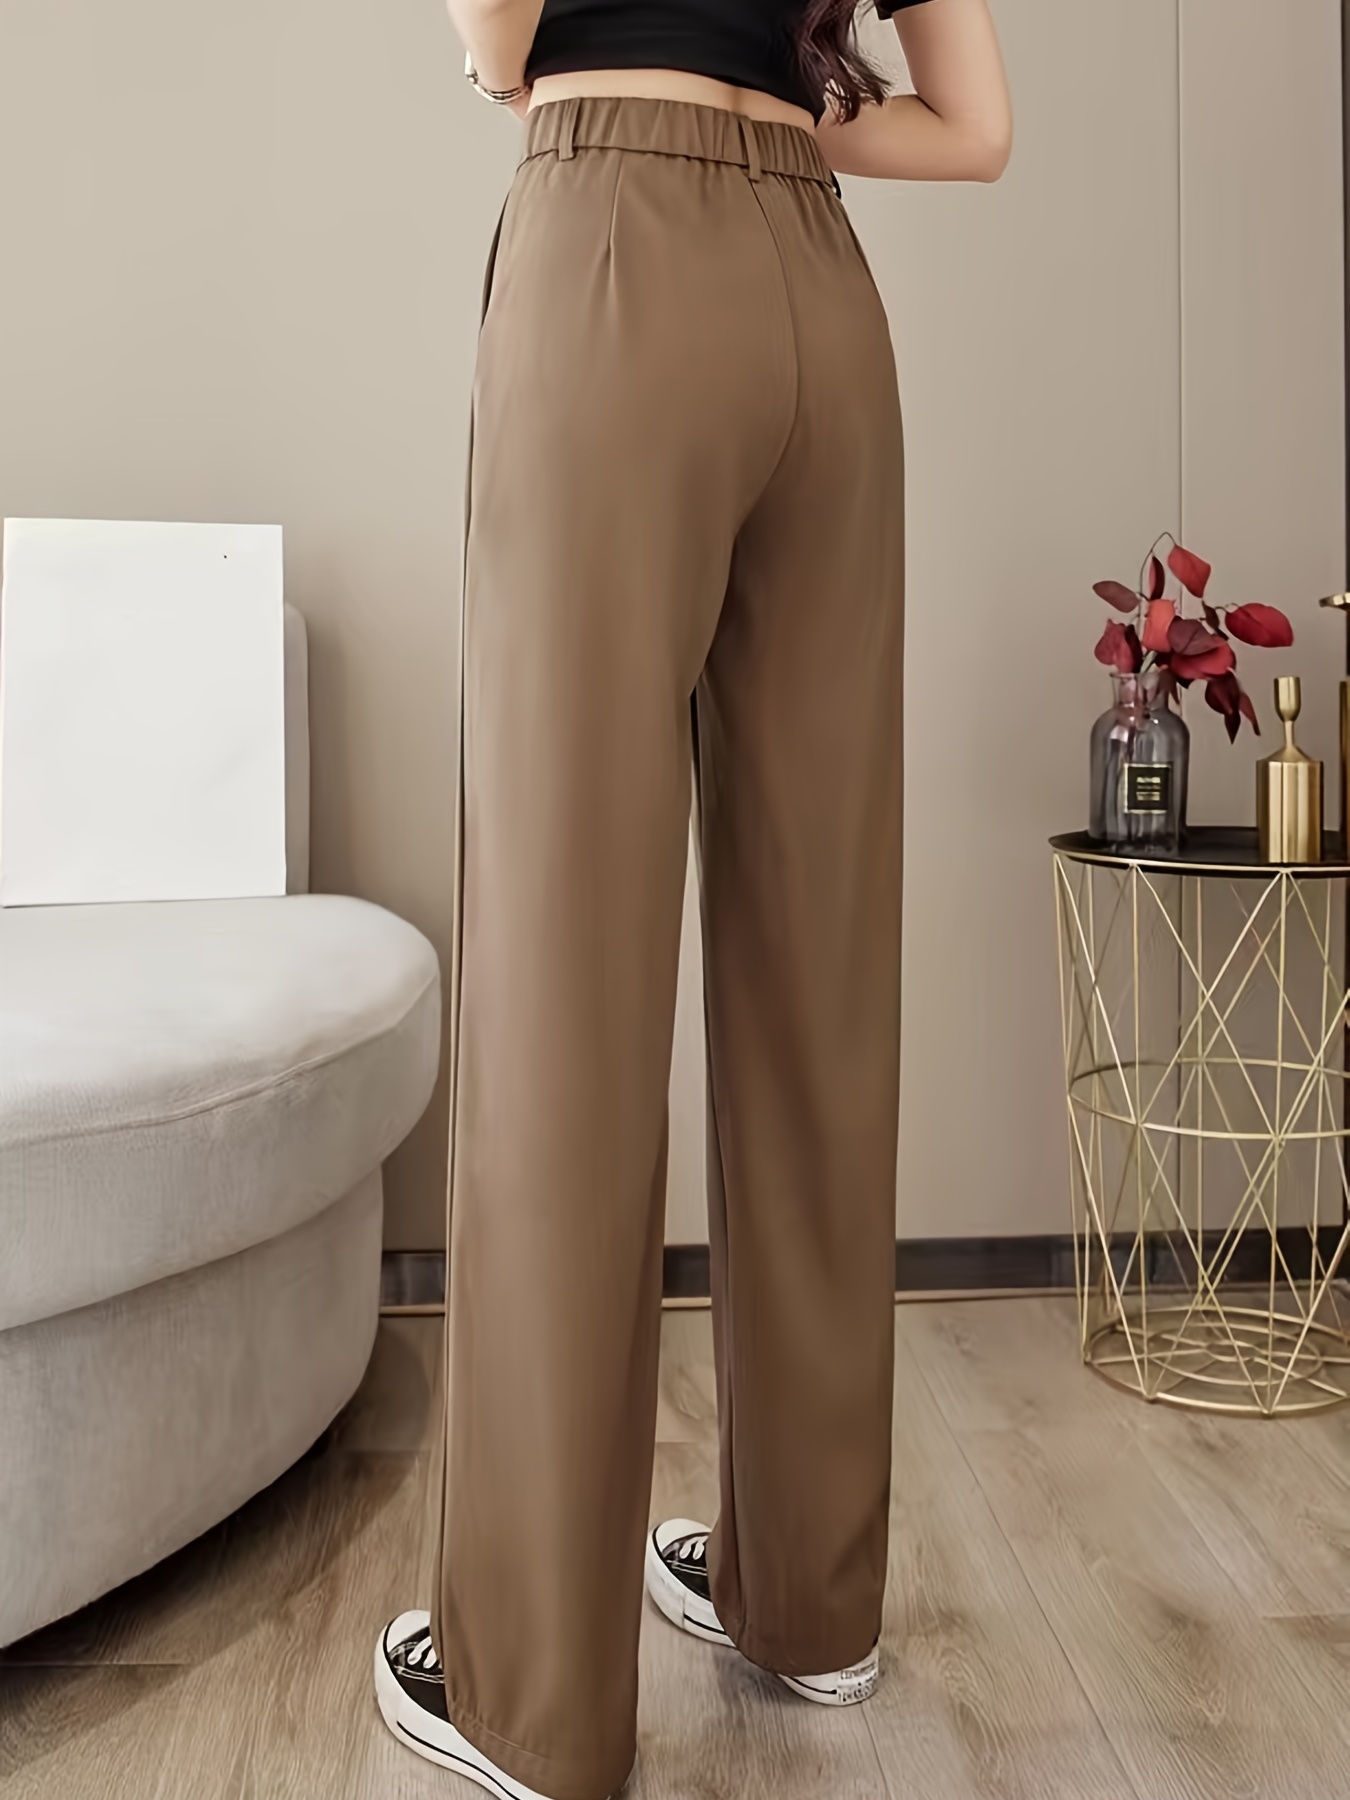 Pants Women All-match Casual Korean Style Spring Solid Simple